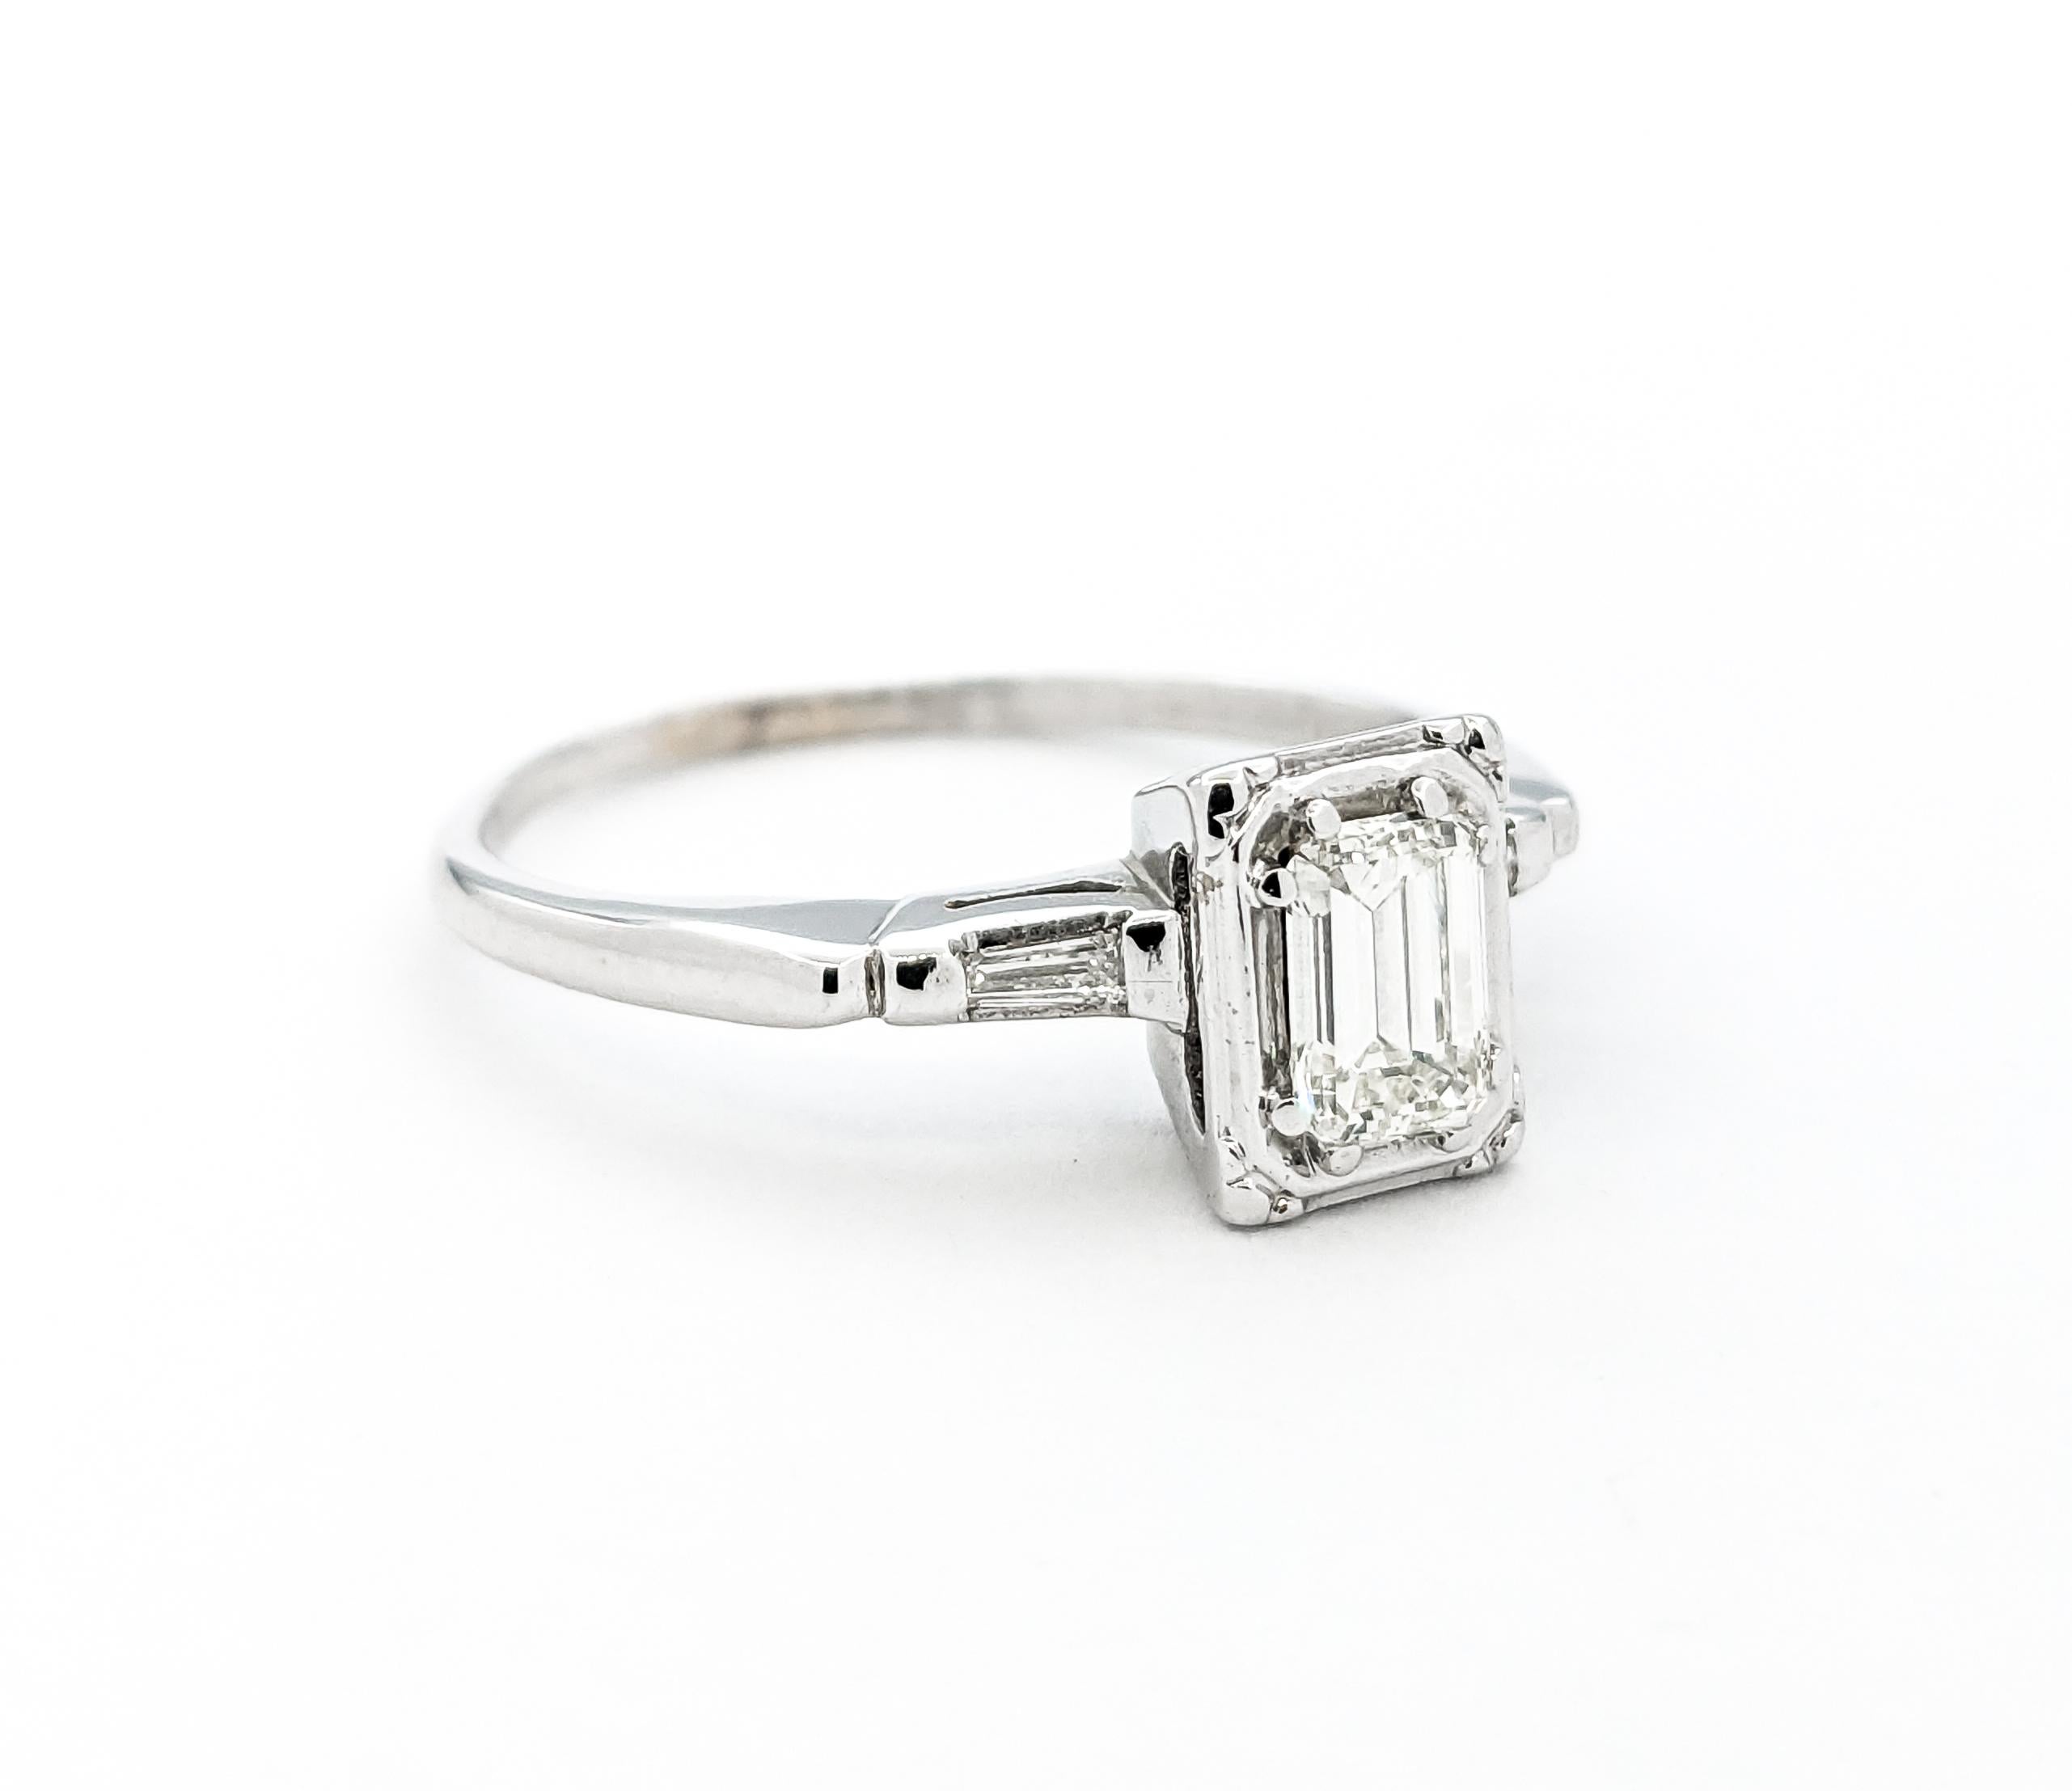 Vintage .46ct Emerald Cut Diamond Engagement Ring In White Gold In Excellent Condition For Sale In Bloomington, MN